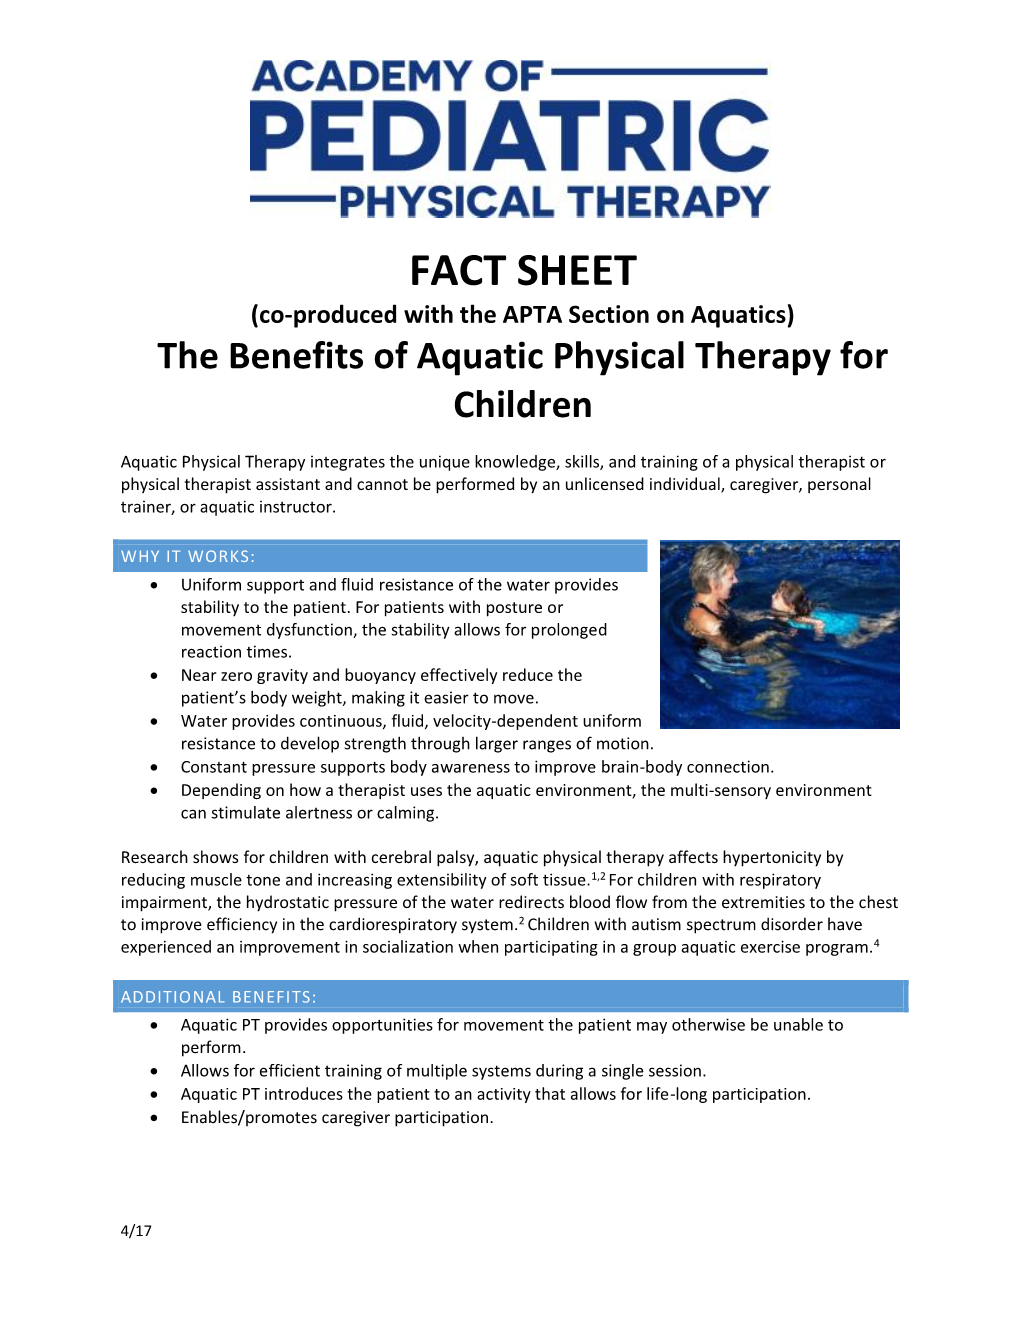 FACT SHEET (Co-Produced with the APTA Section on Aquatics) the Benefits of Aquatic Physical Therapy for Children